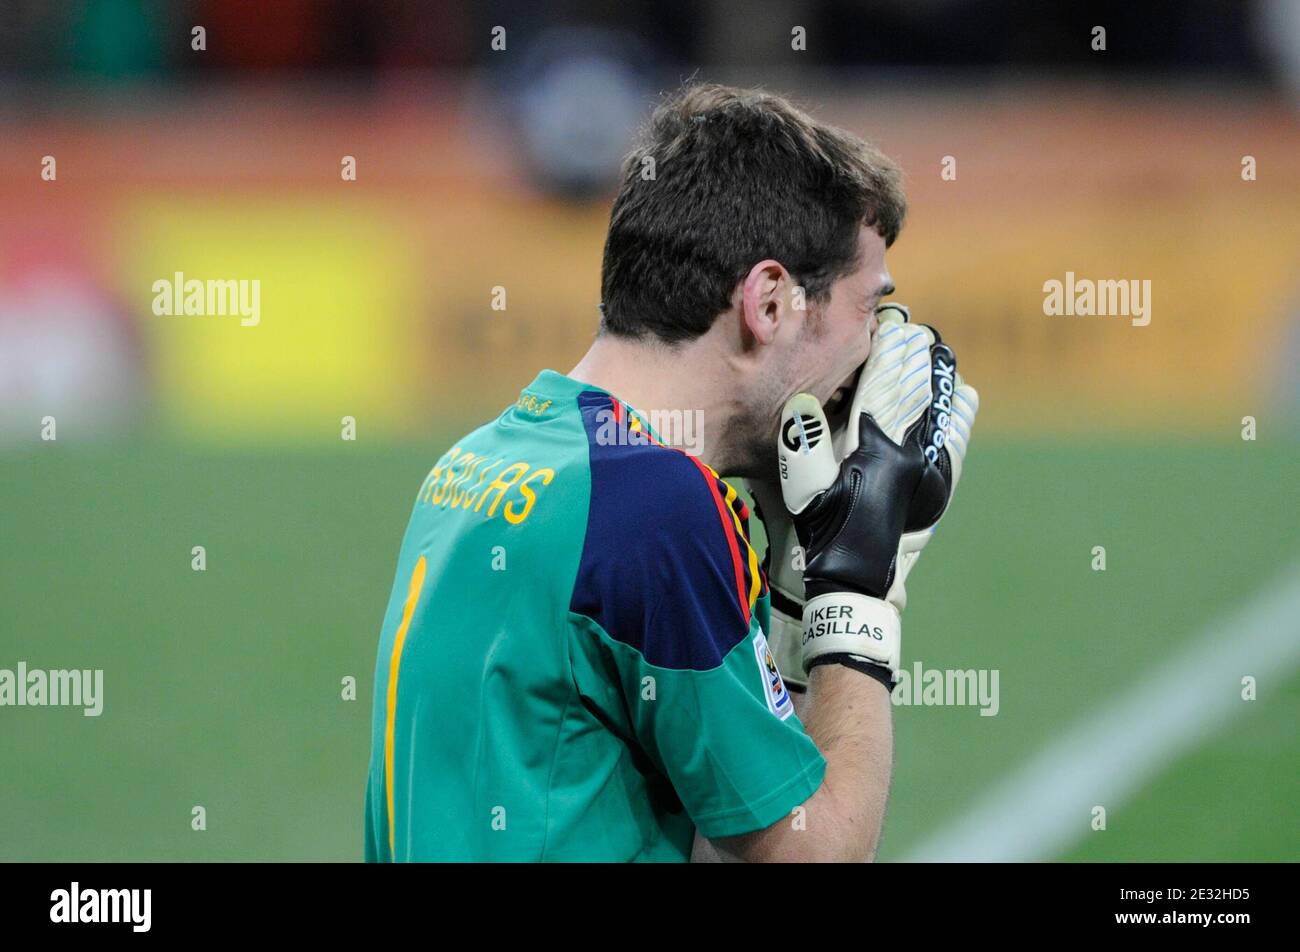 Joy of Spain's Iker Casillas after Andres Iniesta scored the 1-0 goal in the 2010 FIFA World Cup South Africa Final Soccer match, Spain vs Netherlands at Soccer City football stadium in Johannesburg, South Africa on July 11th, 2010. Spain won 1-0. Photo by Henri Szwarc/ABACAPRESS.COM Stock Photo